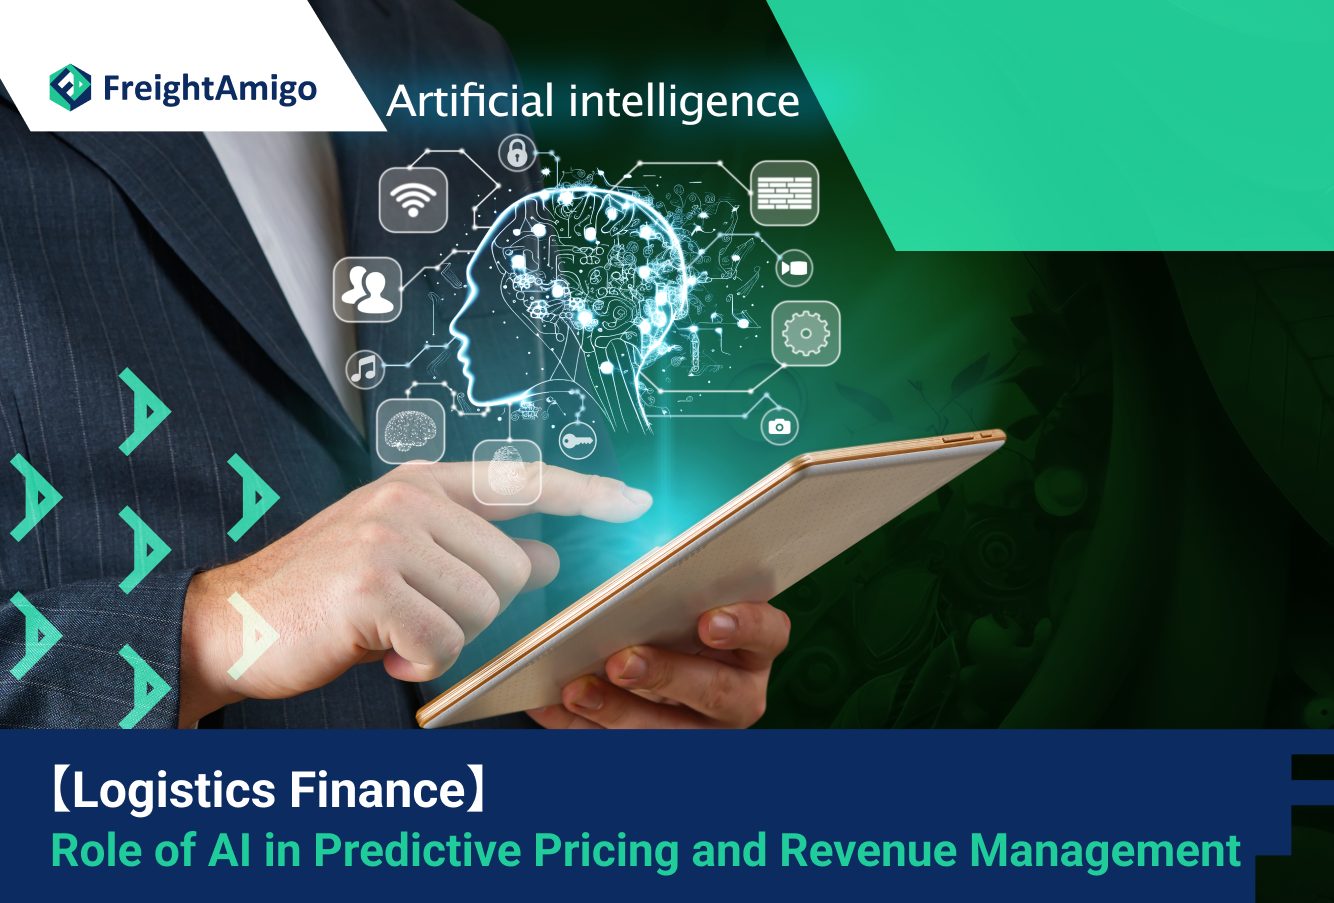 【Logistics Finance】 Role of Artificial Intelligence in Predictive Pricing and Revenue Management